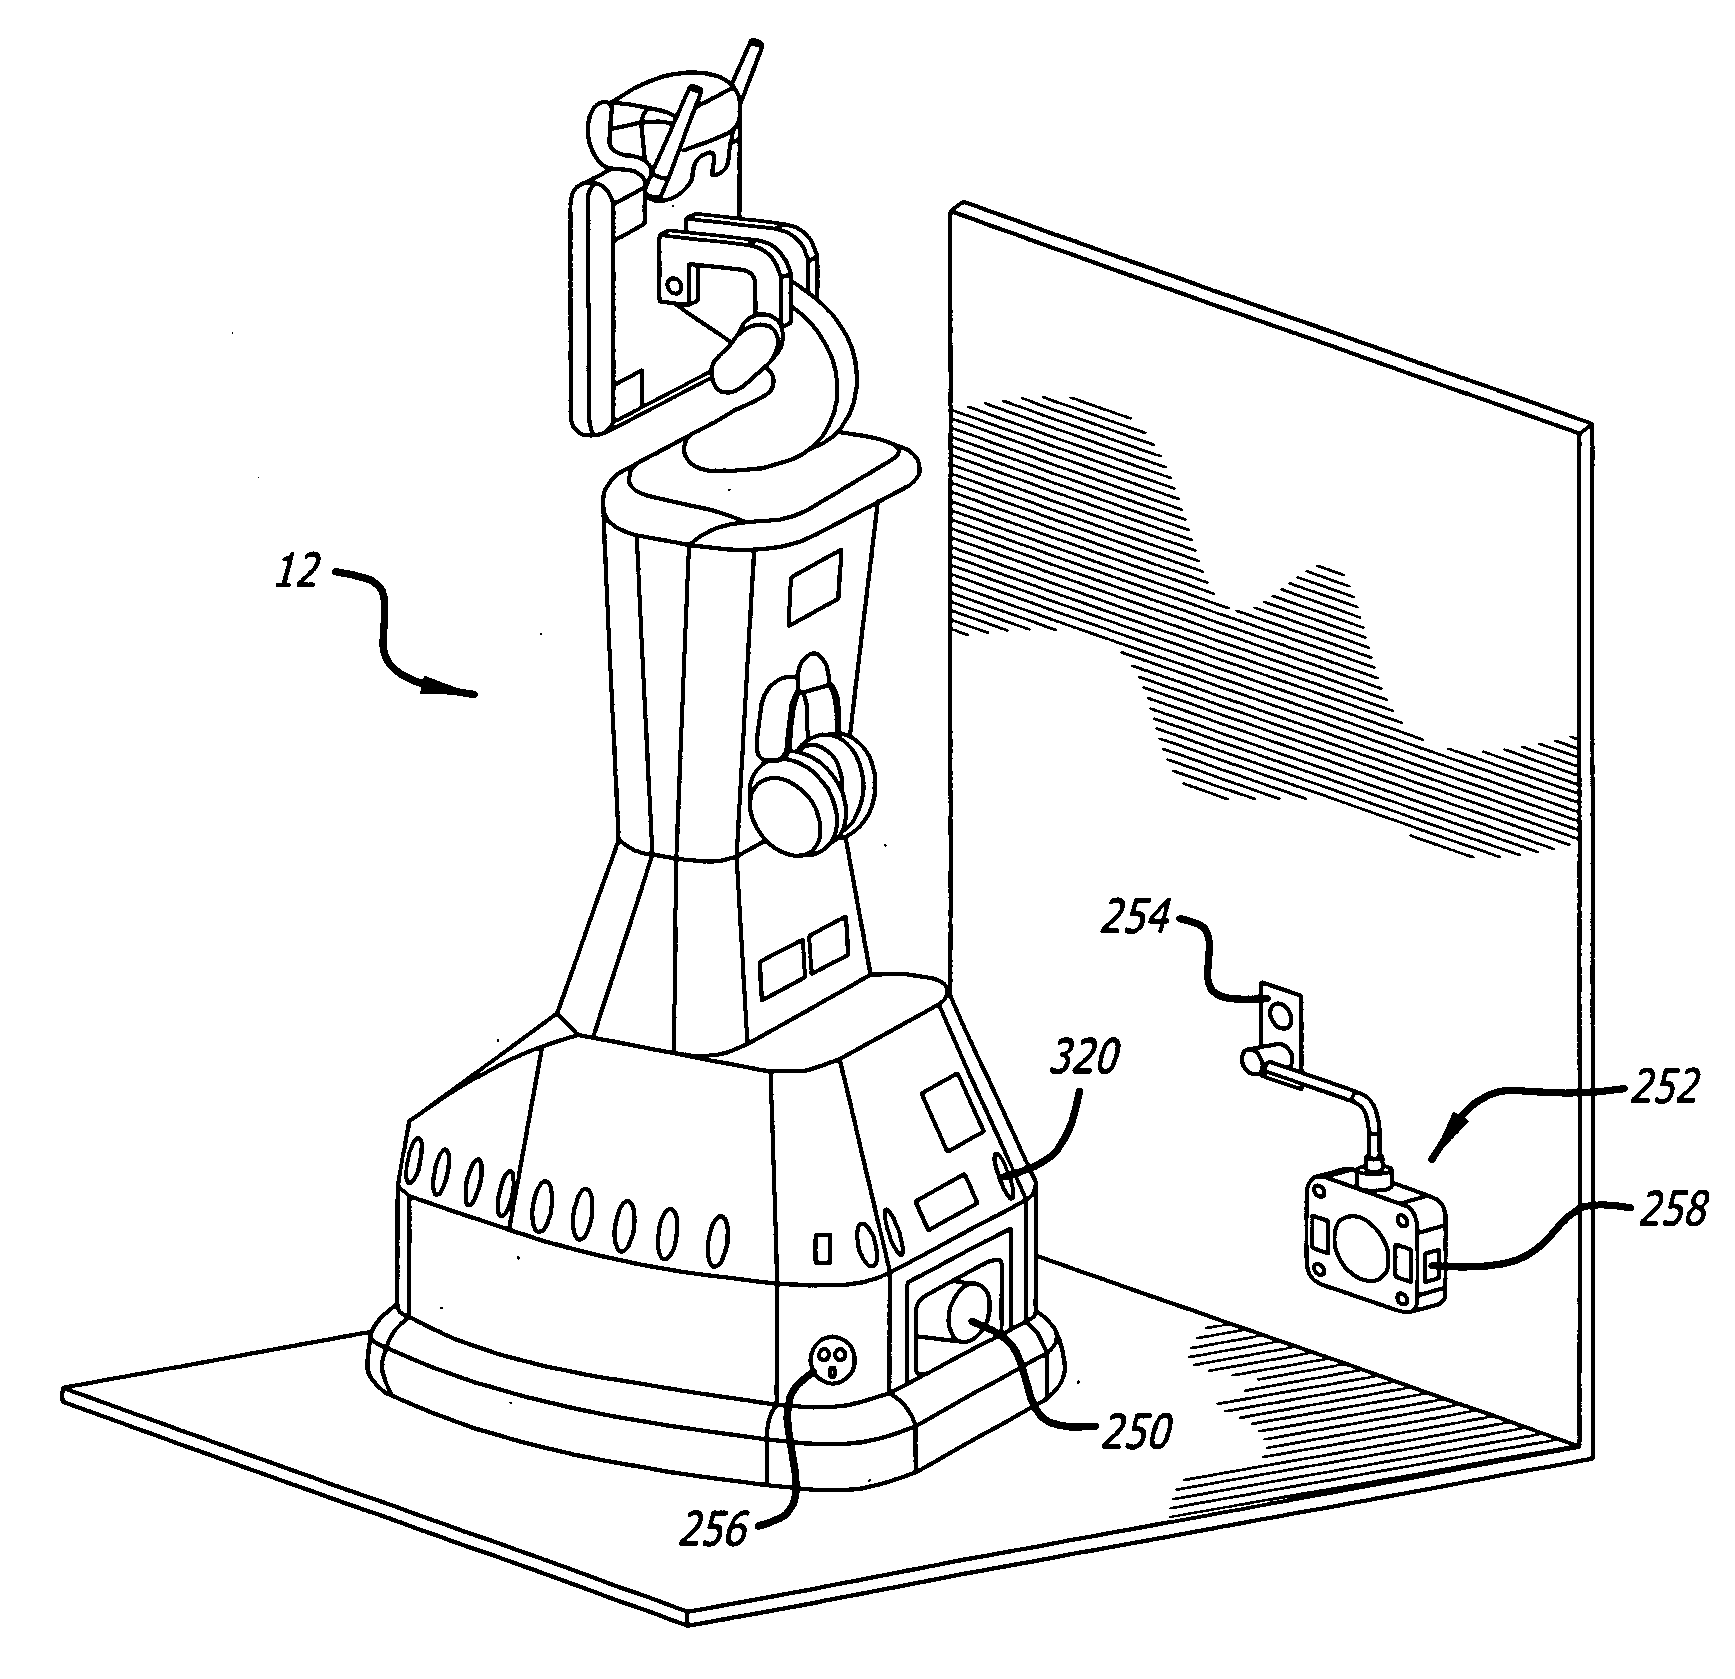 Docking system for a tele-presence robot